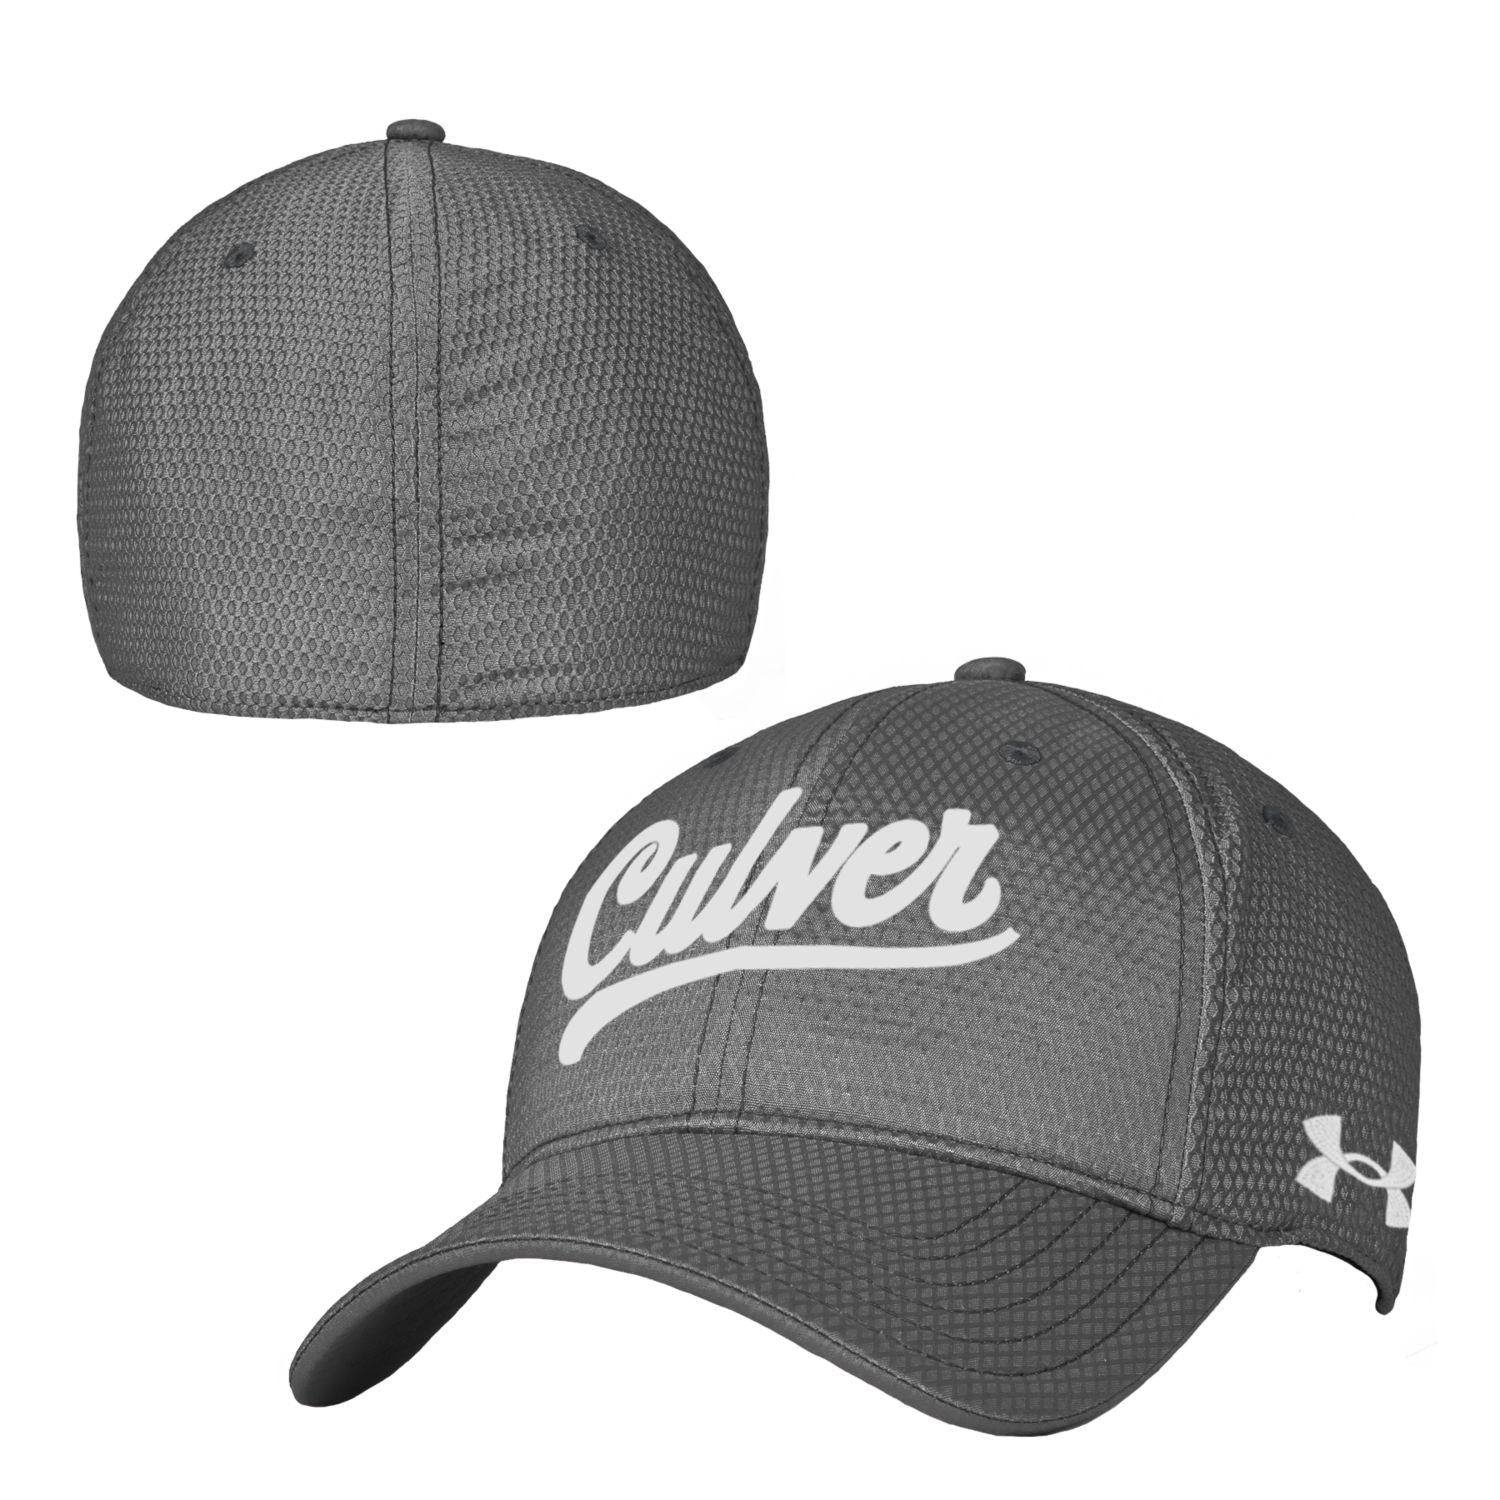 Under Armour Culver Zone Stretch Fit Hat - Pitch Grey